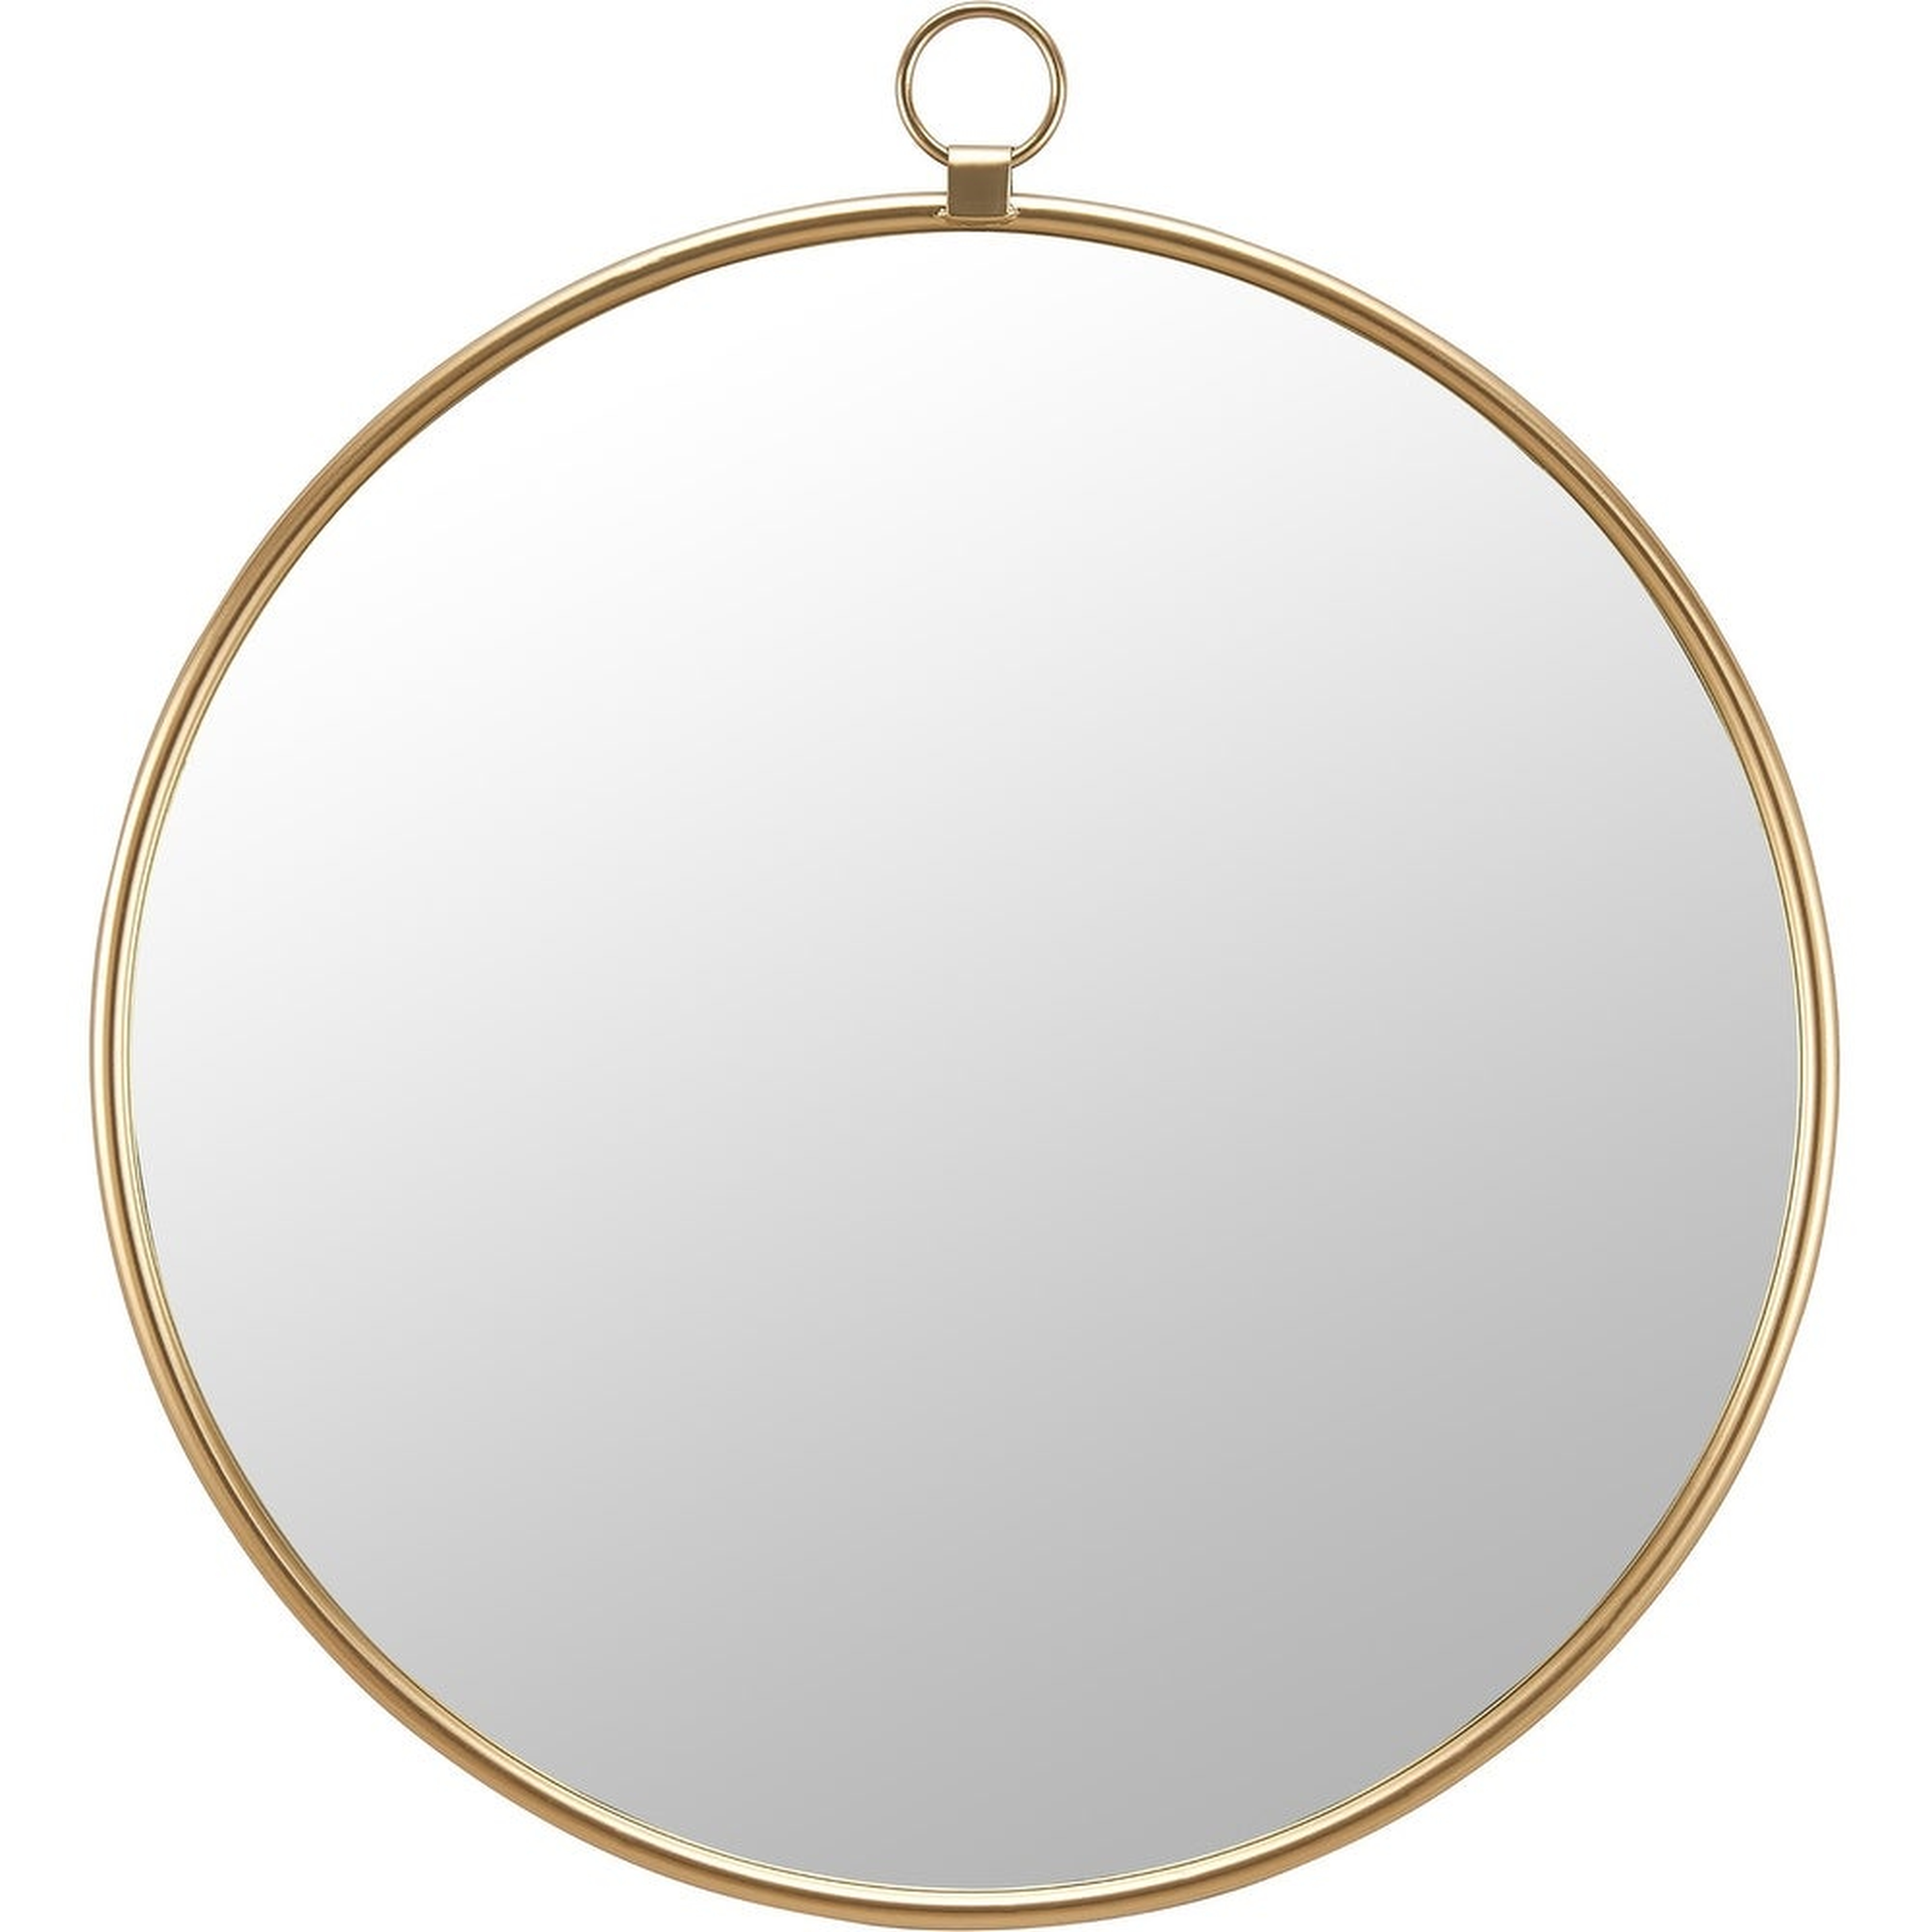 FirsTime & Co.® Marshall Gold Round Mirror, American Crafted, Gold, Mirror, 32.5 x 1 x 36 in - 32.5 x 1 x 36 in - Overstock